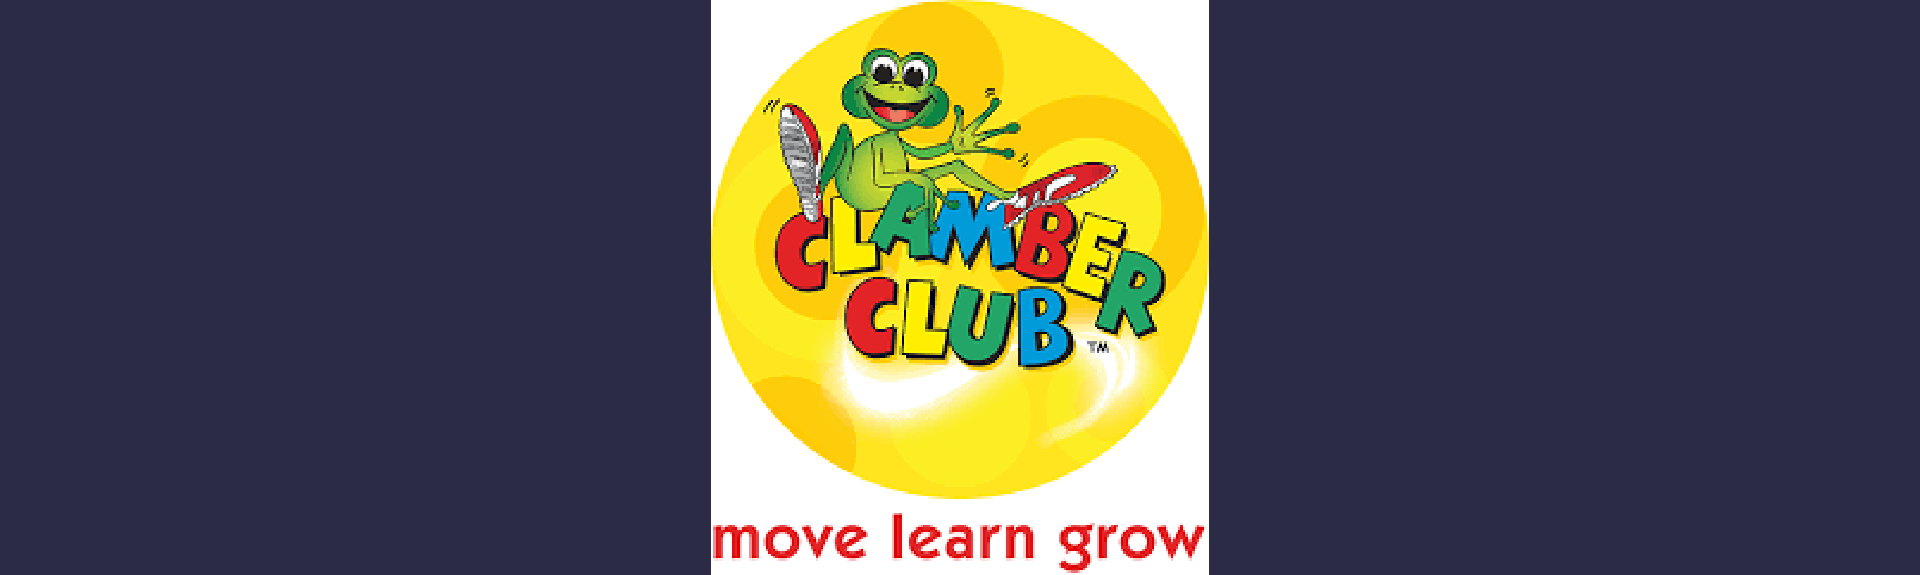 Clamber Club Toddlers | Orientation Day | Fairlands